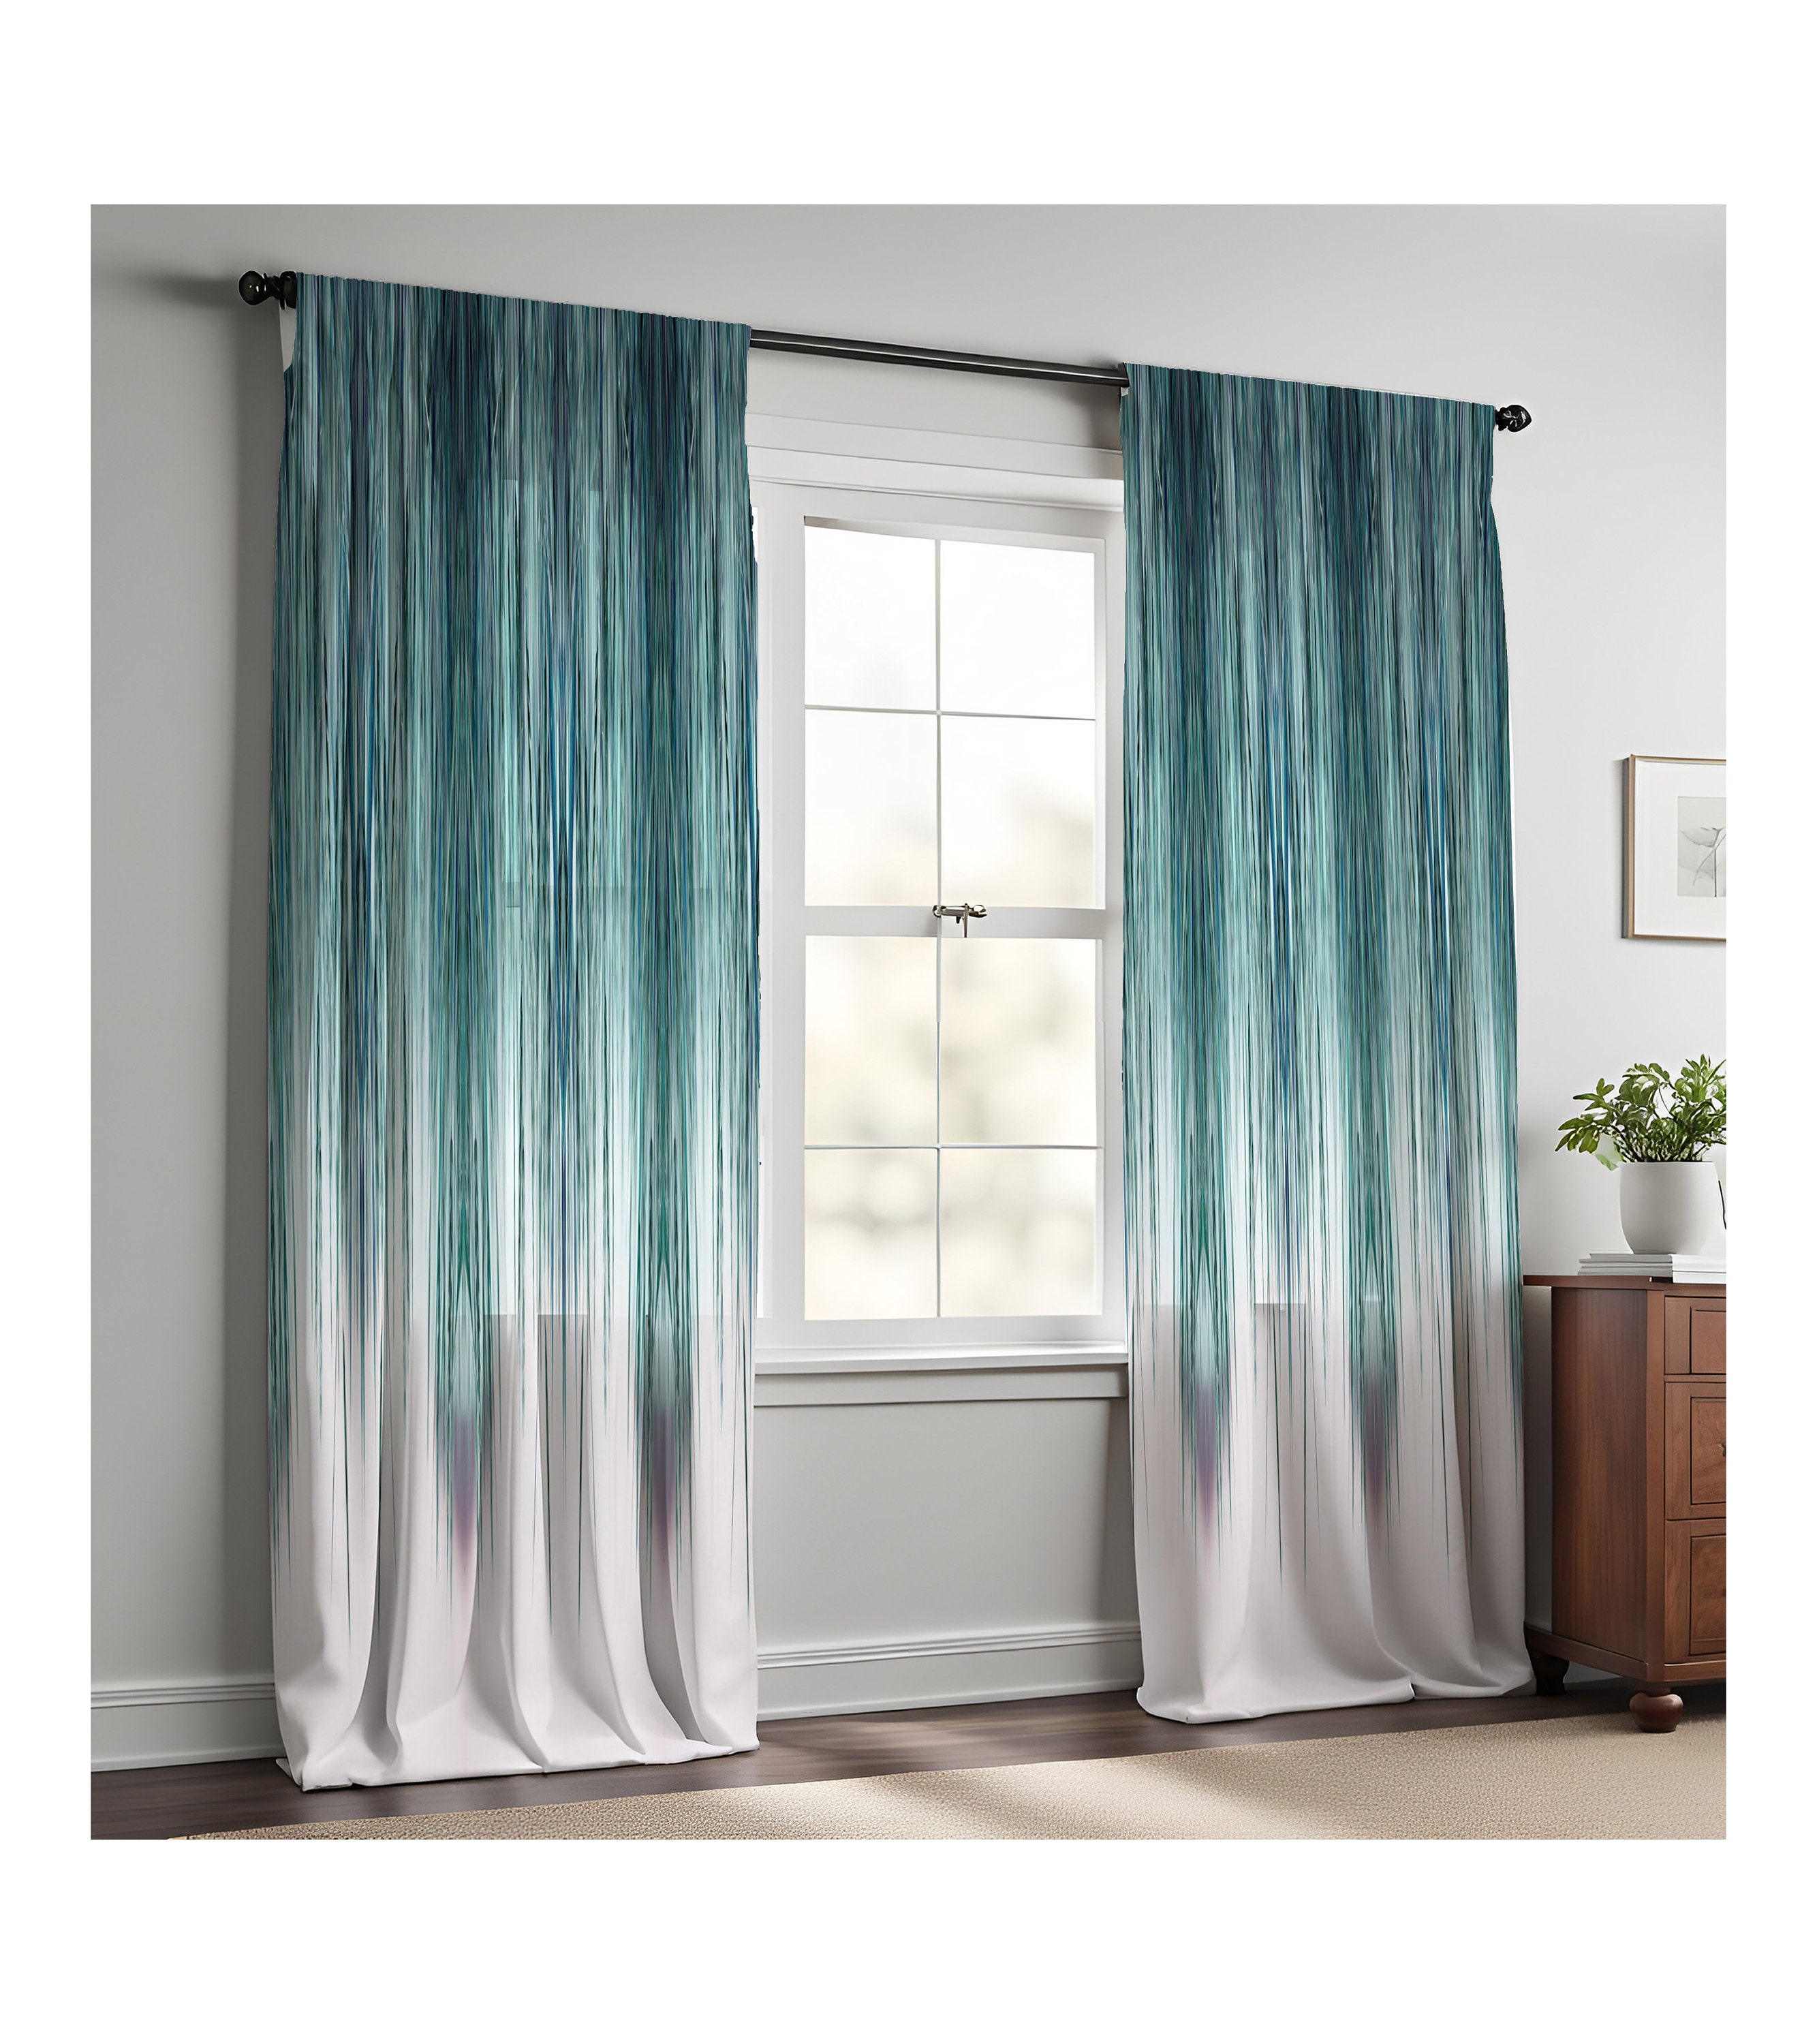 What is the best dye/method to dye polyester curtains? : r/dyeing